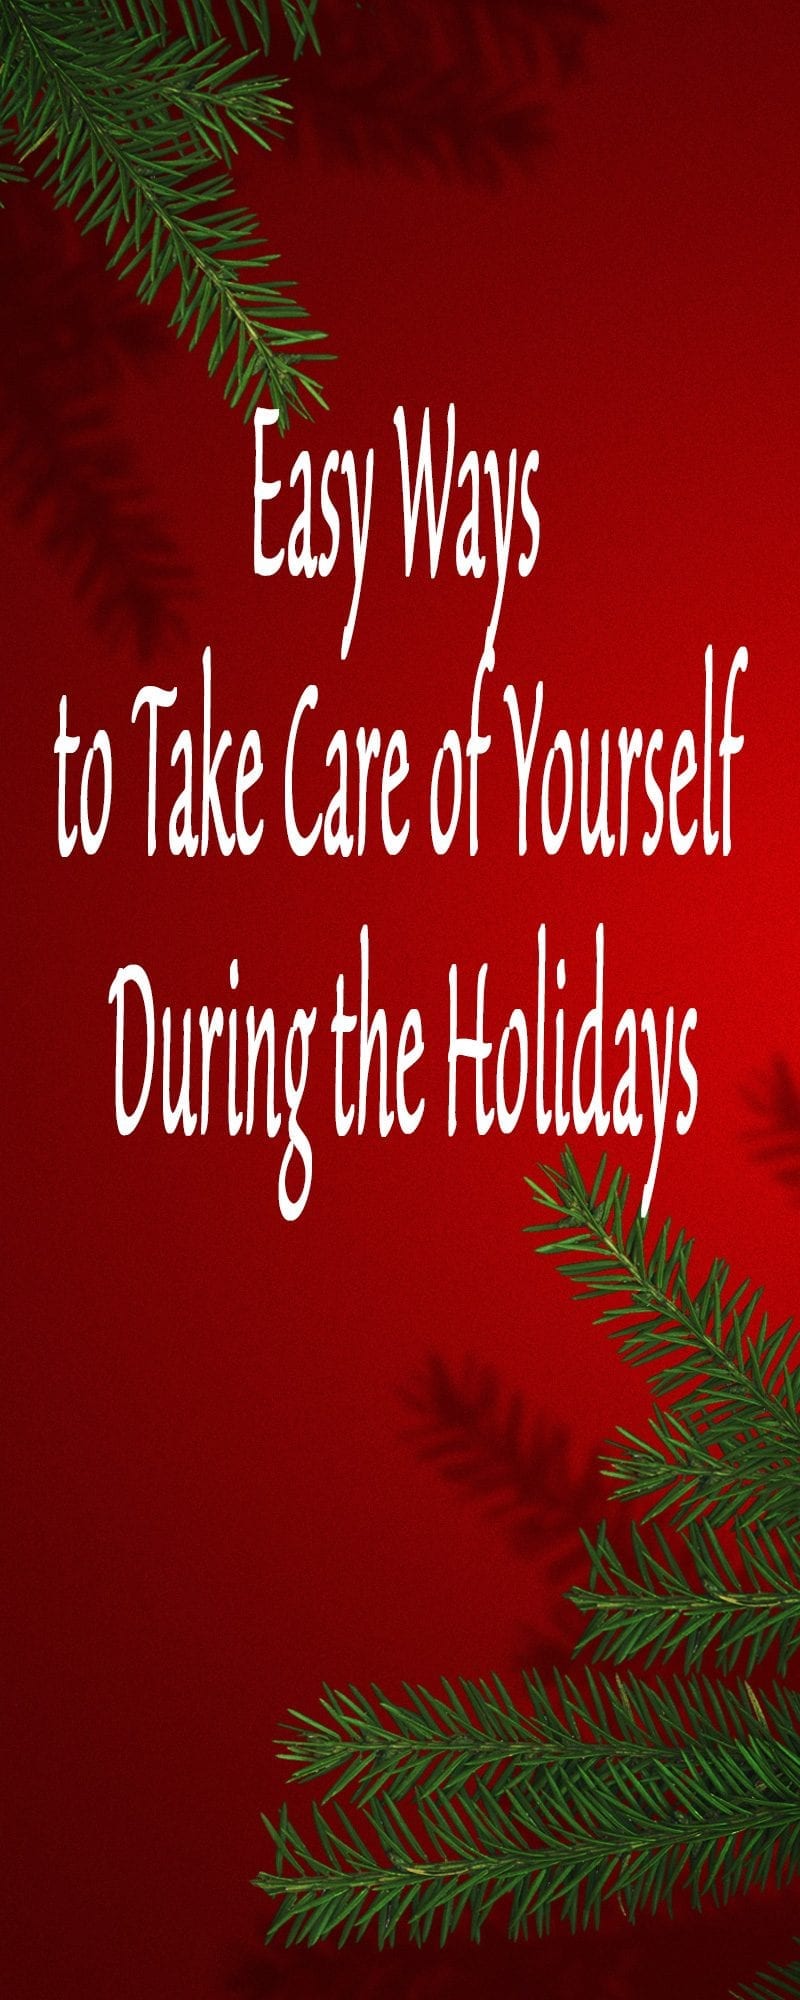 Easy ways to take care of yourself during the holidays